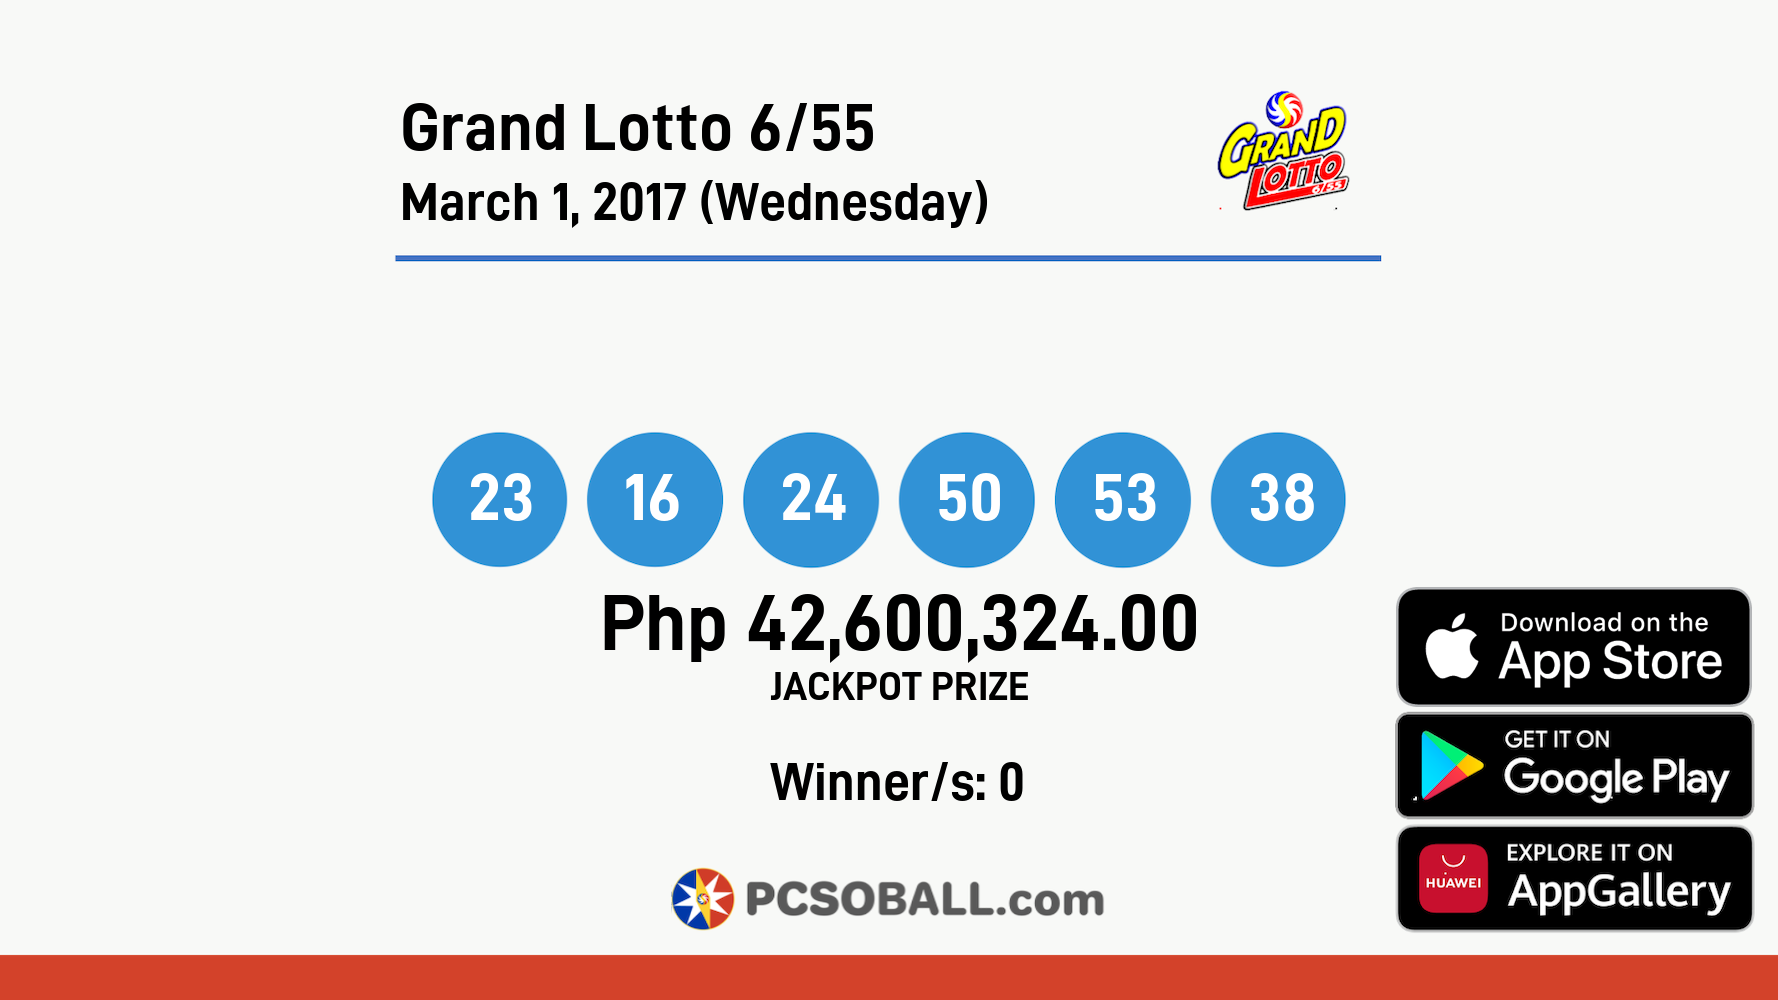 Grand Lotto 6/55 March 1, 2017 (Wednesday) Result